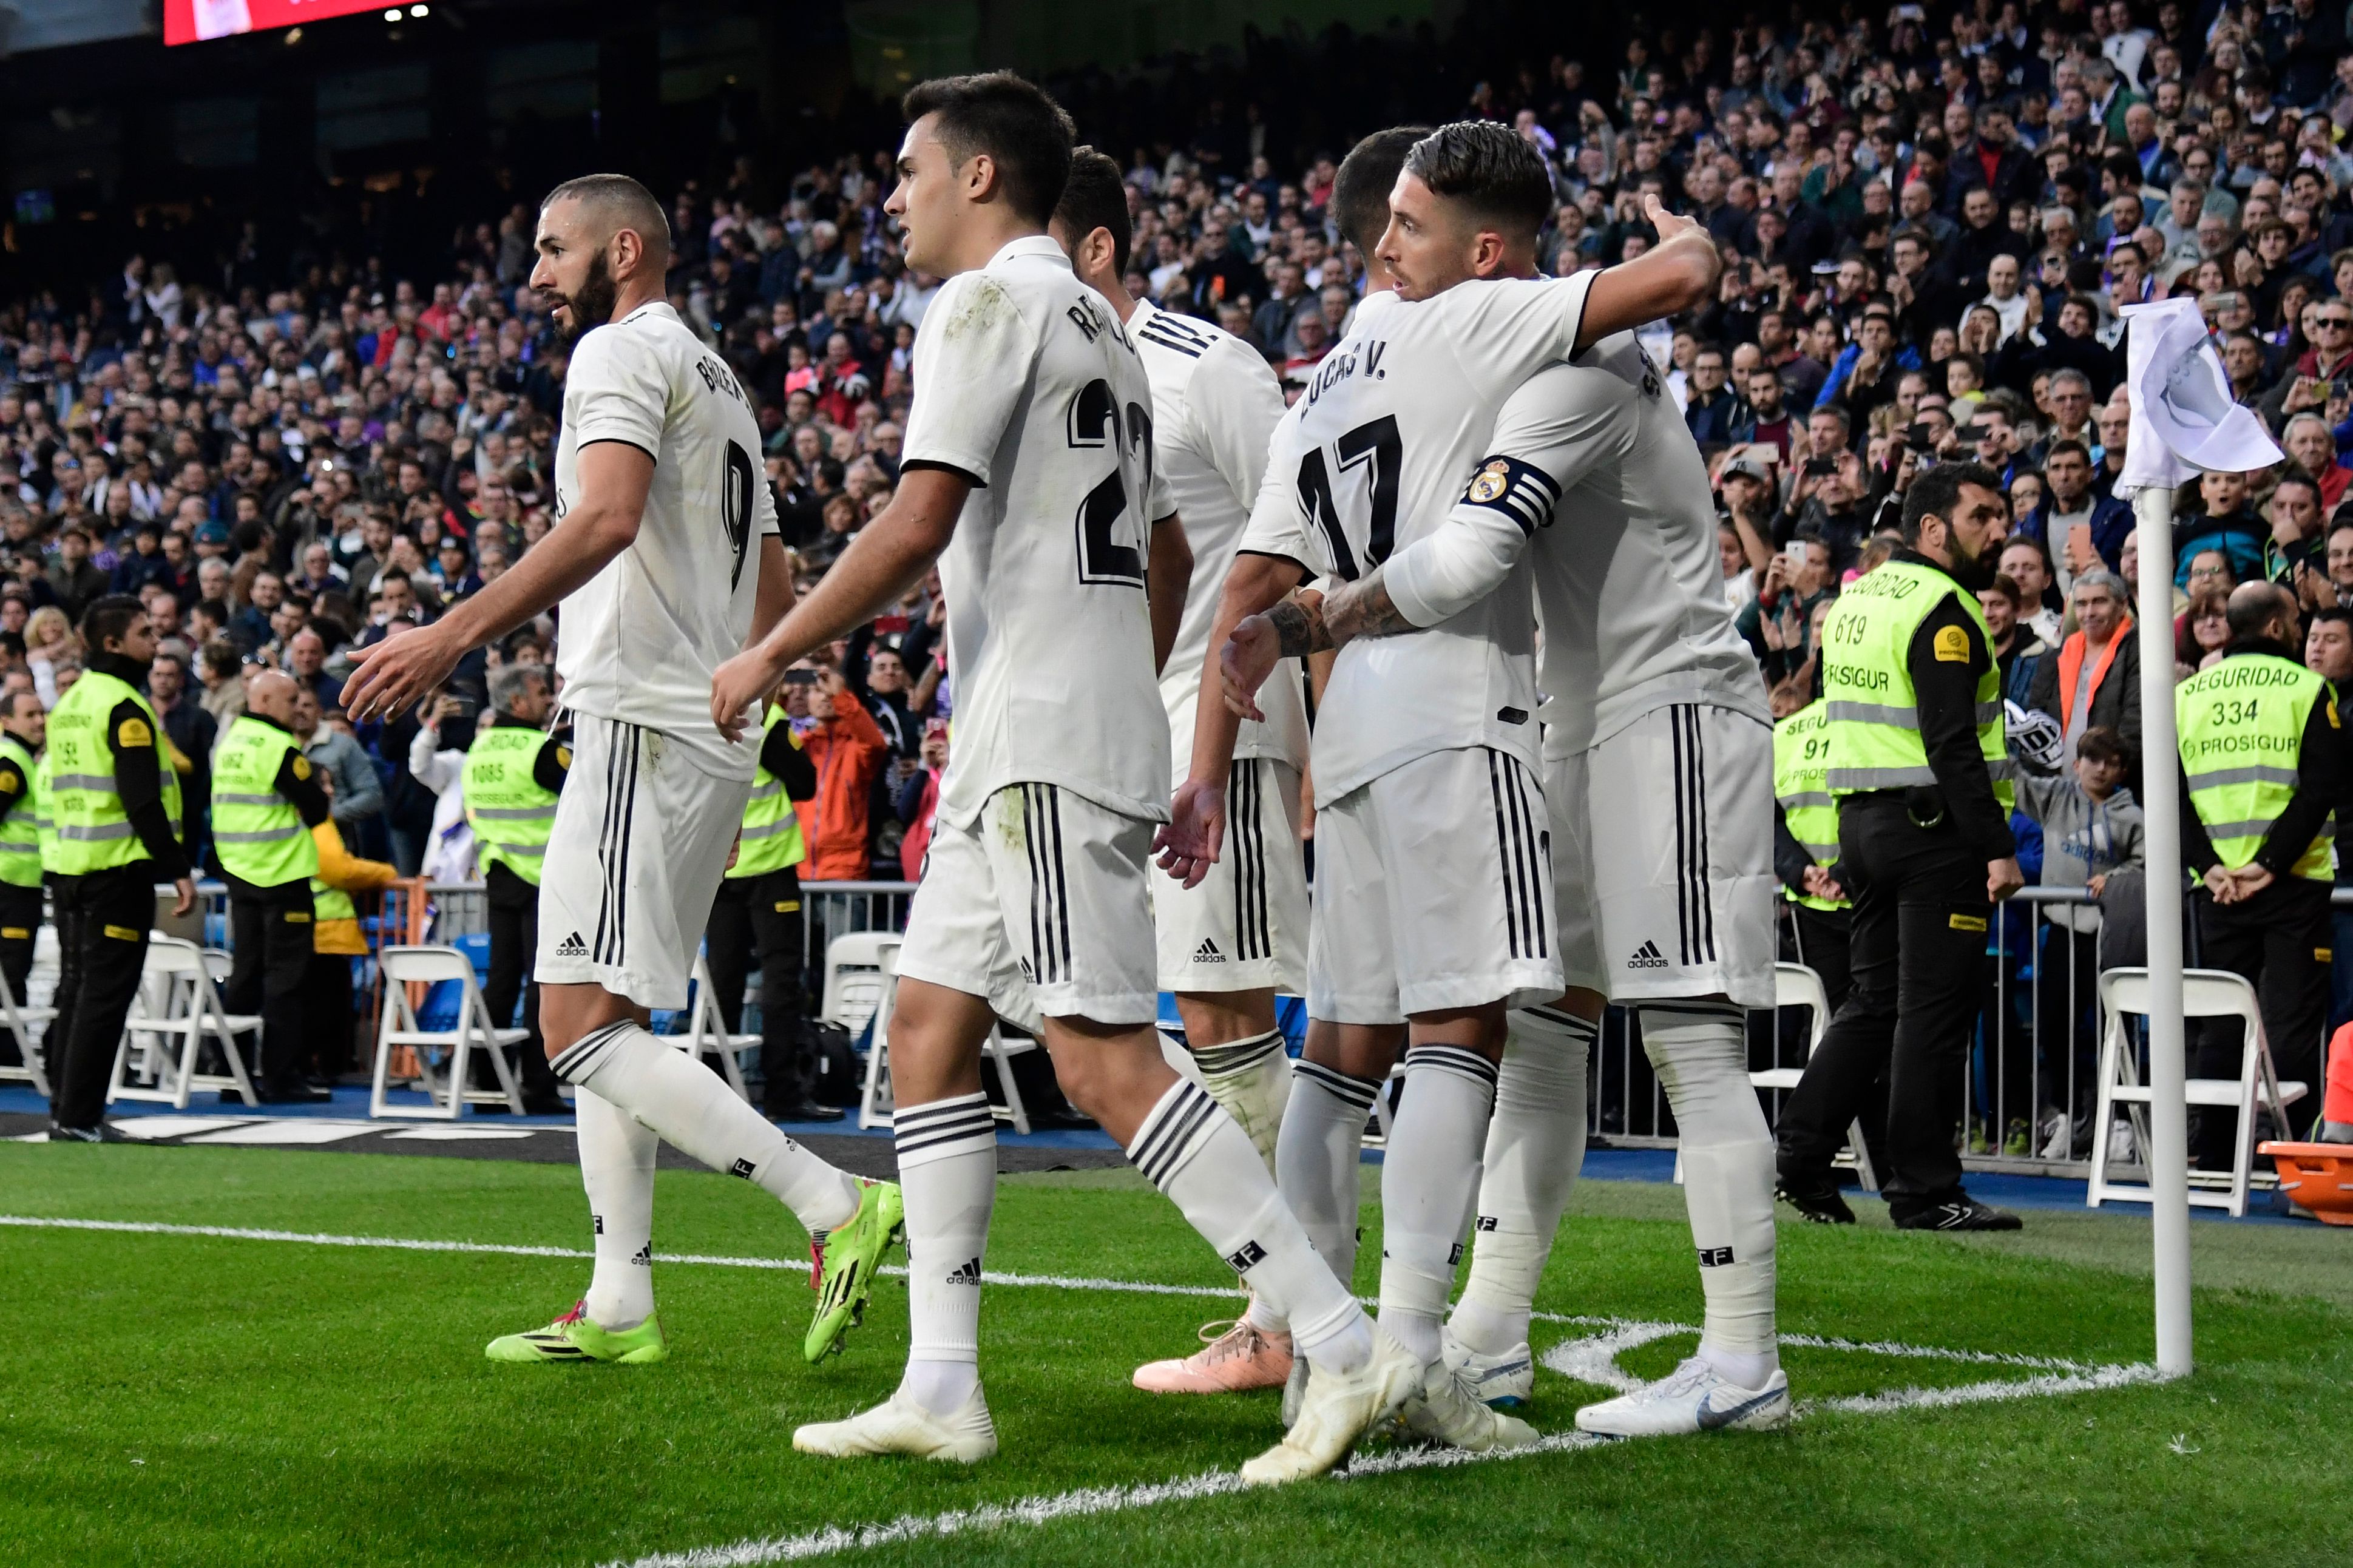 Real Madrid's Spanish defender Sergio Ramos (R) celebrates with teammates scoring his team's second goal during the Spanish league football match between Real Madrid CF and Real Valladolid FC at the Santiago Bernabeu stadium in Madrid on November 3, 2018. (Photo by JAVIER SORIANO / AFP)        (Photo credit should read JAVIER SORIANO/AFP/Getty Images)